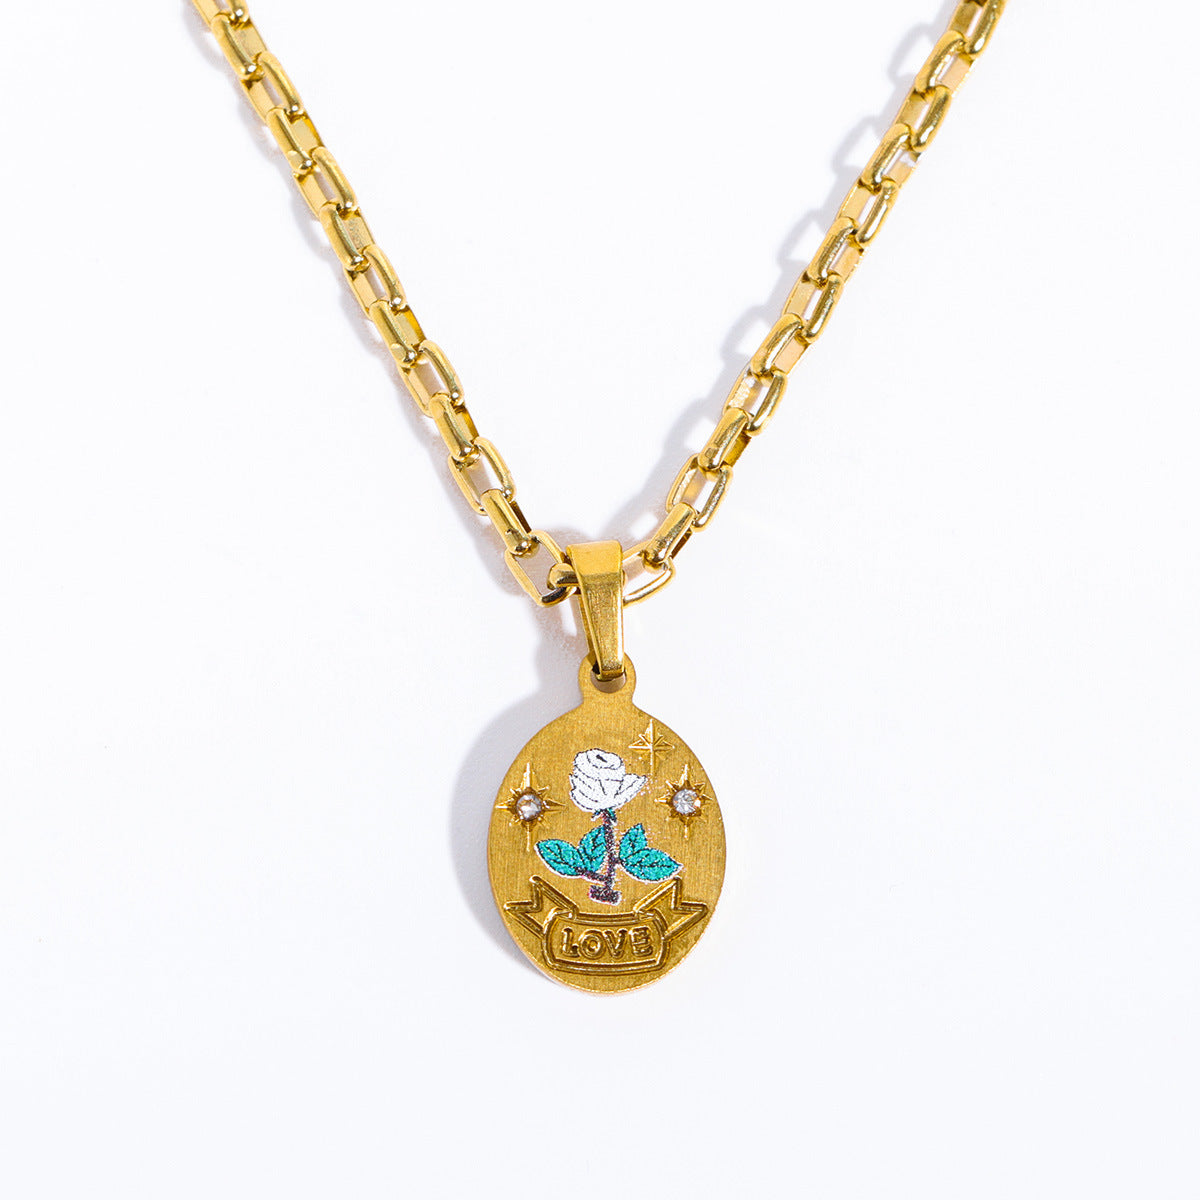 14K gold hand-painted pattern pendant